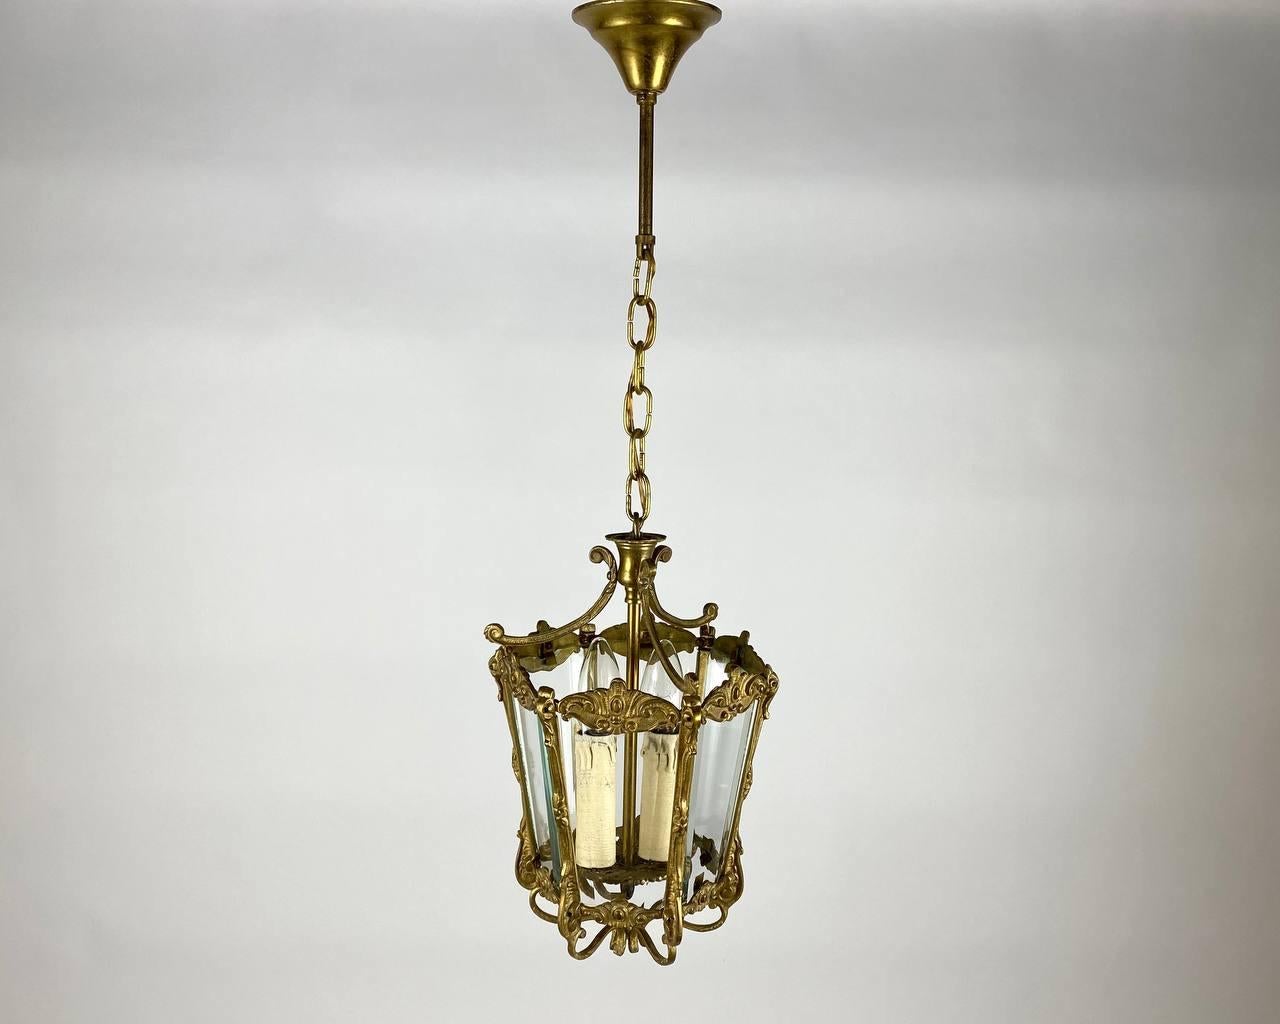 Rare Antique Ceiling Lantern in Gilt Bronze with Glass Panels, 1930s For Sale 3